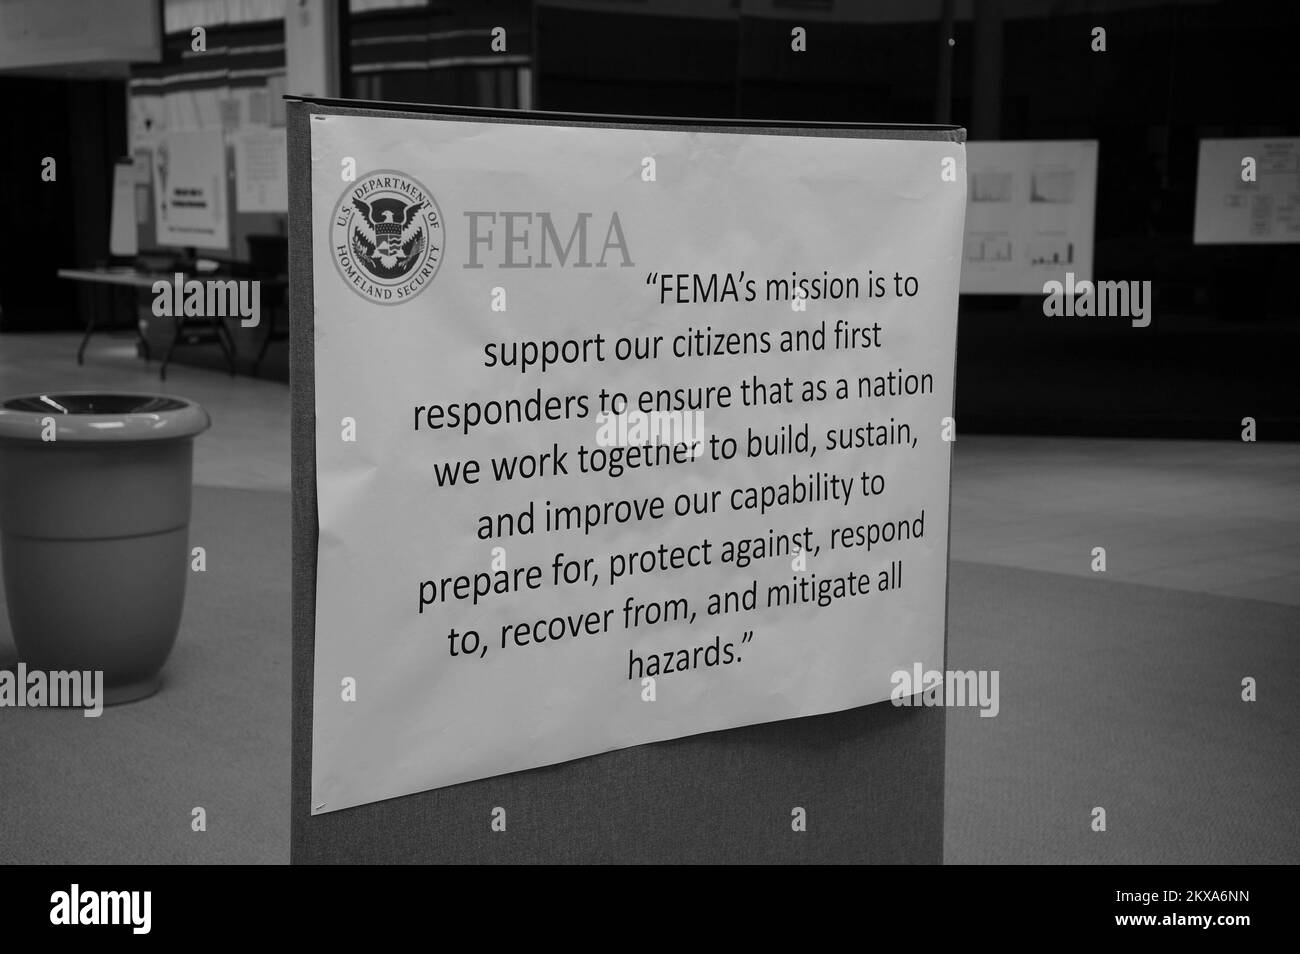 Emergency Planning and Security - Antioch, Tenn. , July 9, 2010   The FEMA Mission Statement is clearly visible at the DR-1909 Joint Field Office in Antioch Tennessee. Head of the Federal Emergency Management Agency Craig Fugate changed the mission statement in September of 2009 to a more modest and collaborative pledge. Martin Grube/FEMA. Tennessee Severe Storms, Flooding, Straight-Line Winds, and Tornadoes. Photographs Relating to Disasters and Emergency Management Programs, Activities, and Officials Stock Photo